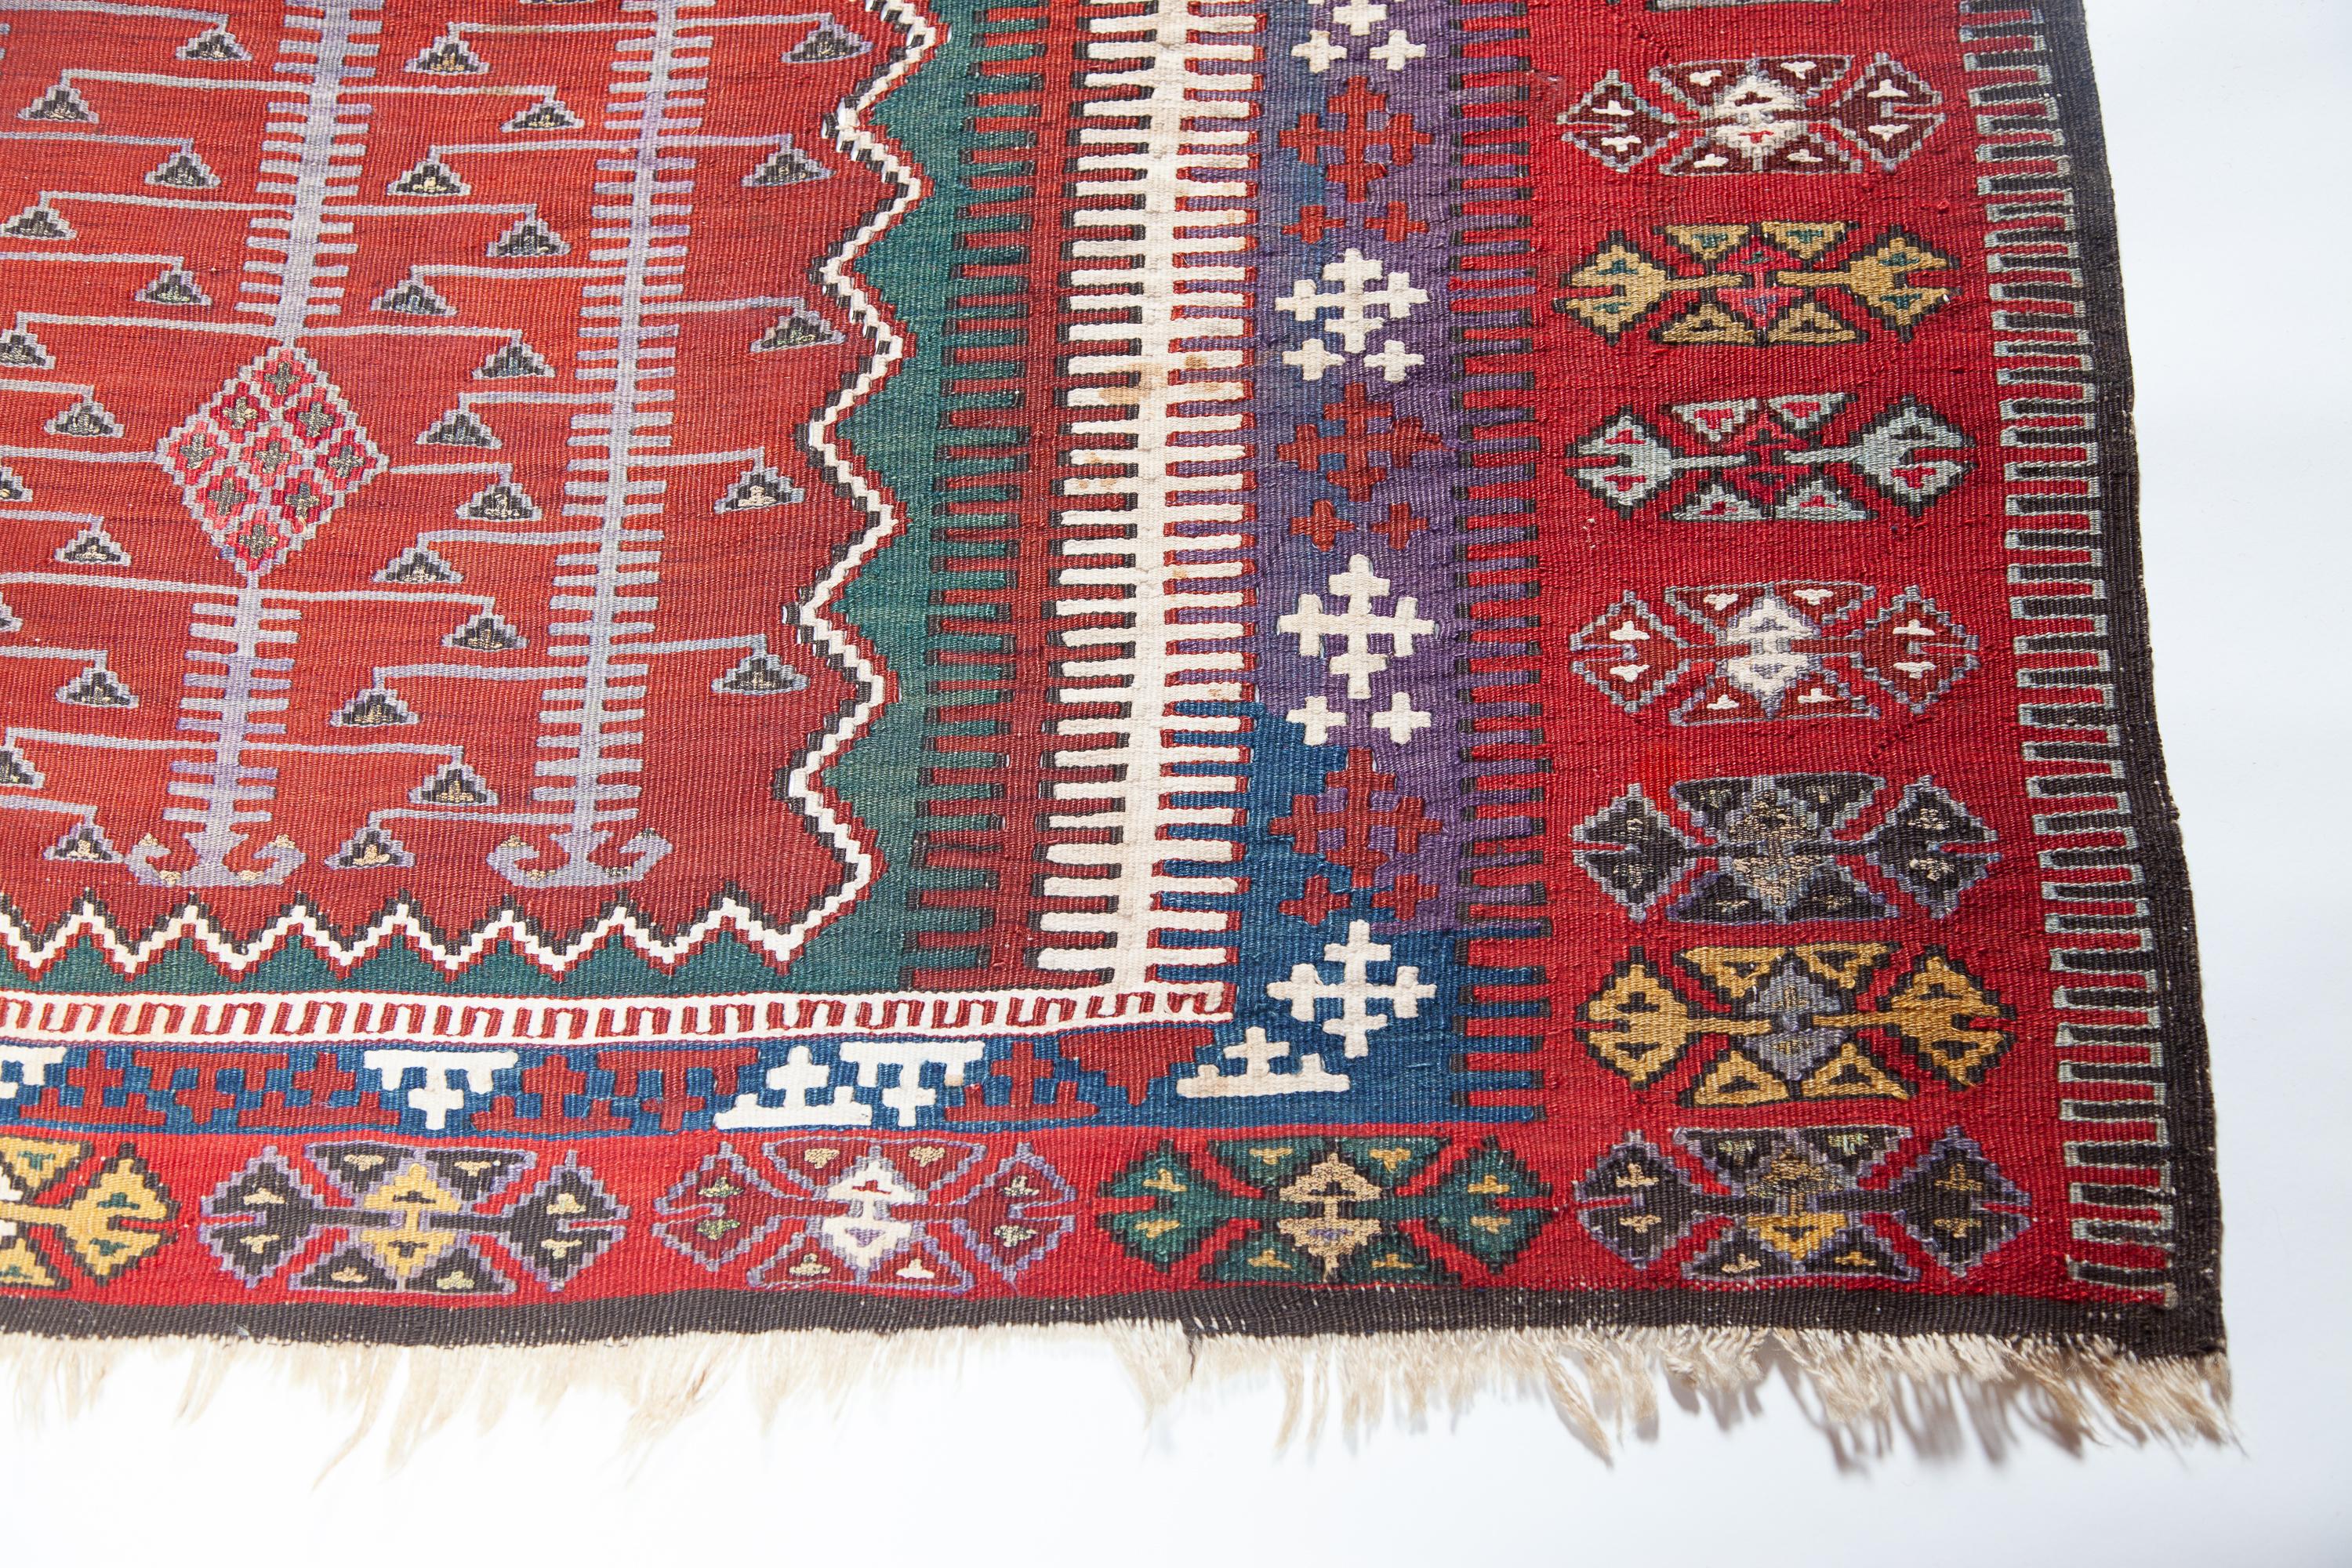 This is Central Anatolian antique Kilim from the Konya - Obruk region with a rare and beautiful color composition. 

This highly collectible antique kilim has a wonderful special colors and texture that is typical of an old kilim in good